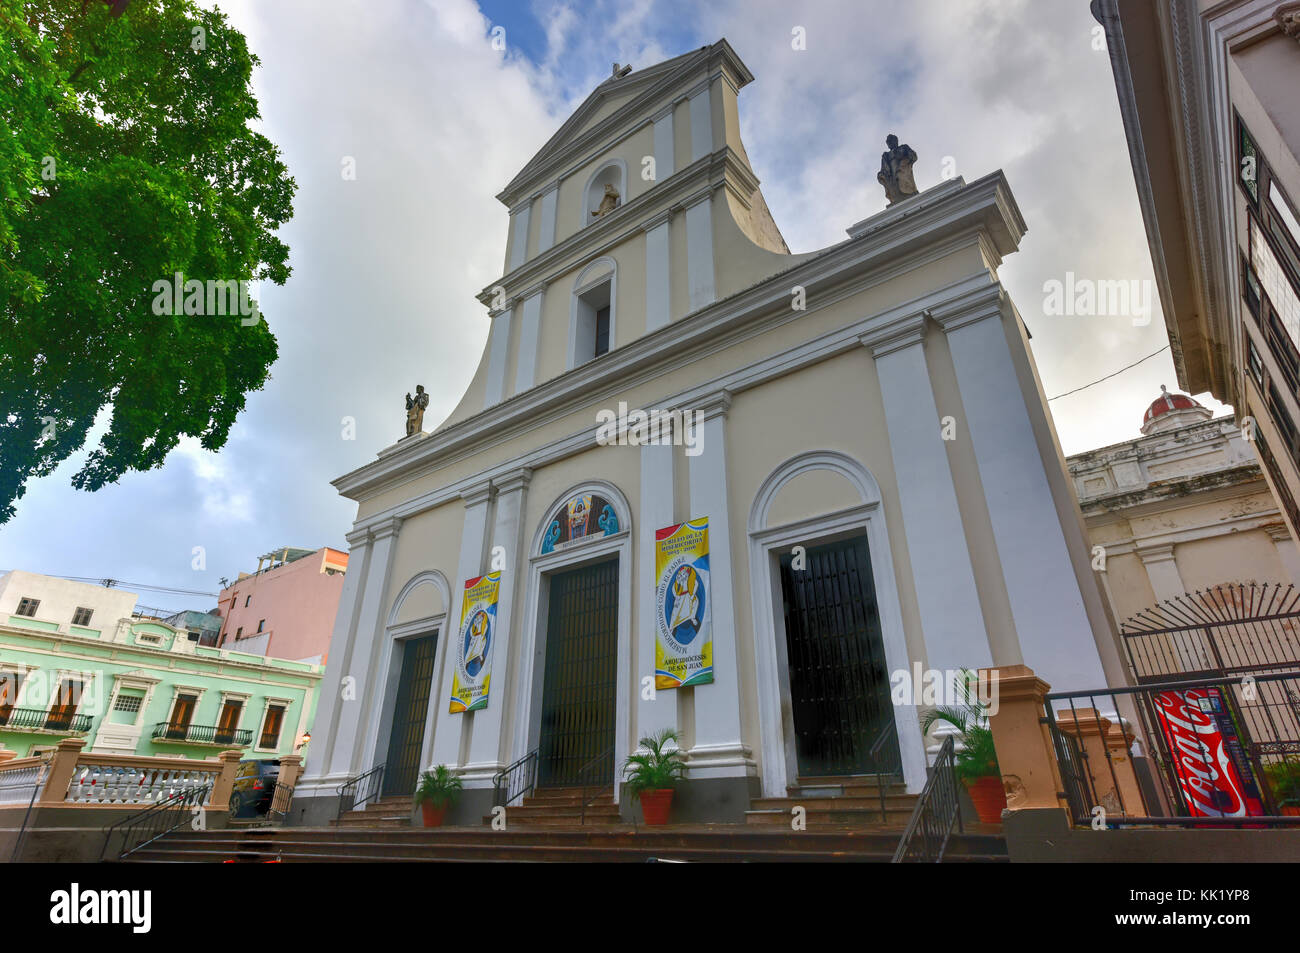 Cathedral of San Juan Bautista is a Roman Catholic cathedral in Old San Juan, Puerto Rico. This church is built in 1521 and is the oldest church in th Stock Photo